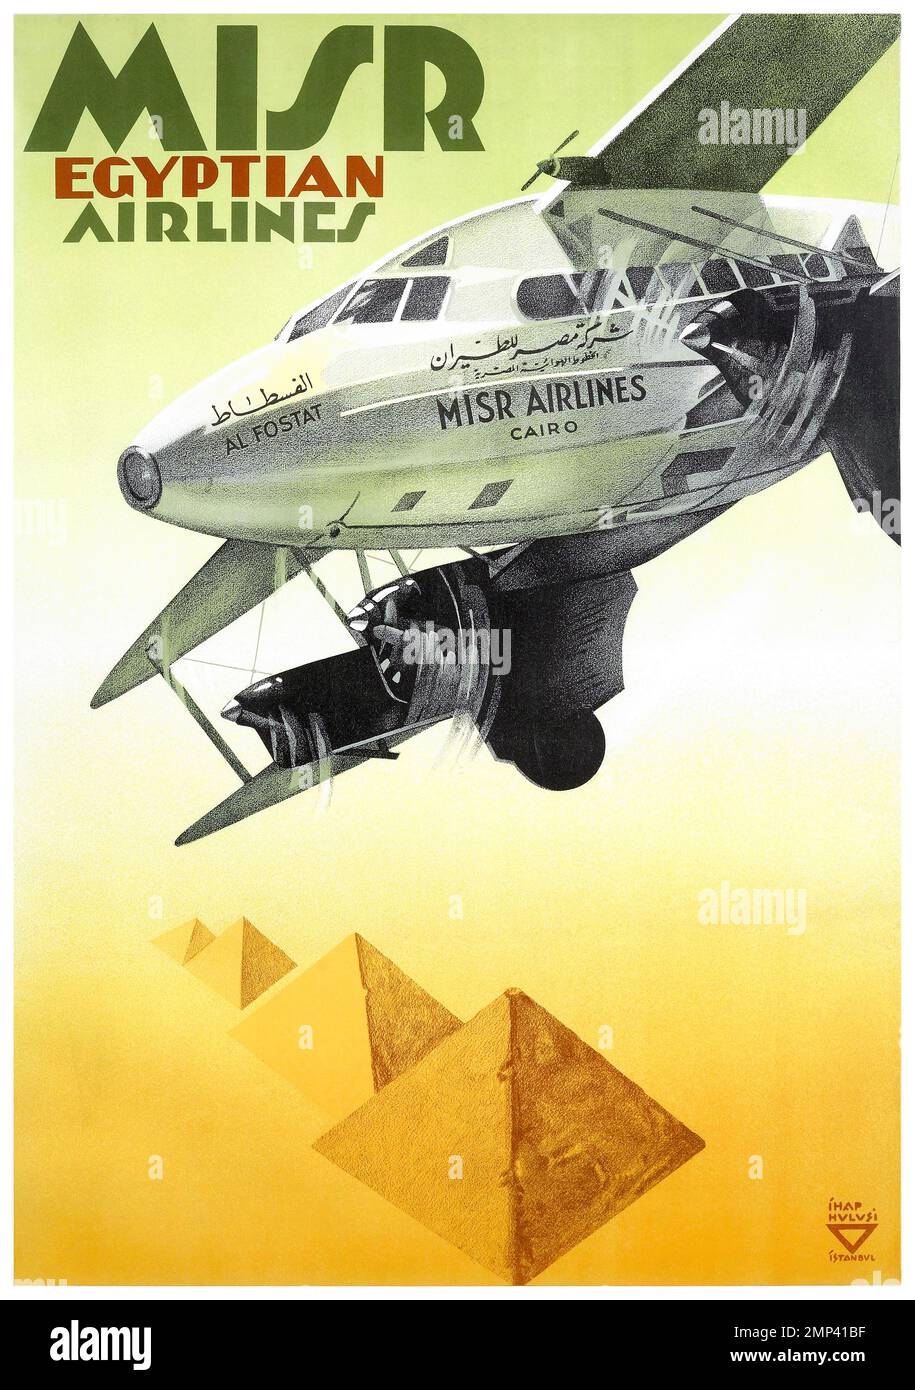 MISR Egyptian airlines by Ihap Hulusi Görey (1898-1986). Poster published in 1937 in Egypt. Stock Photo